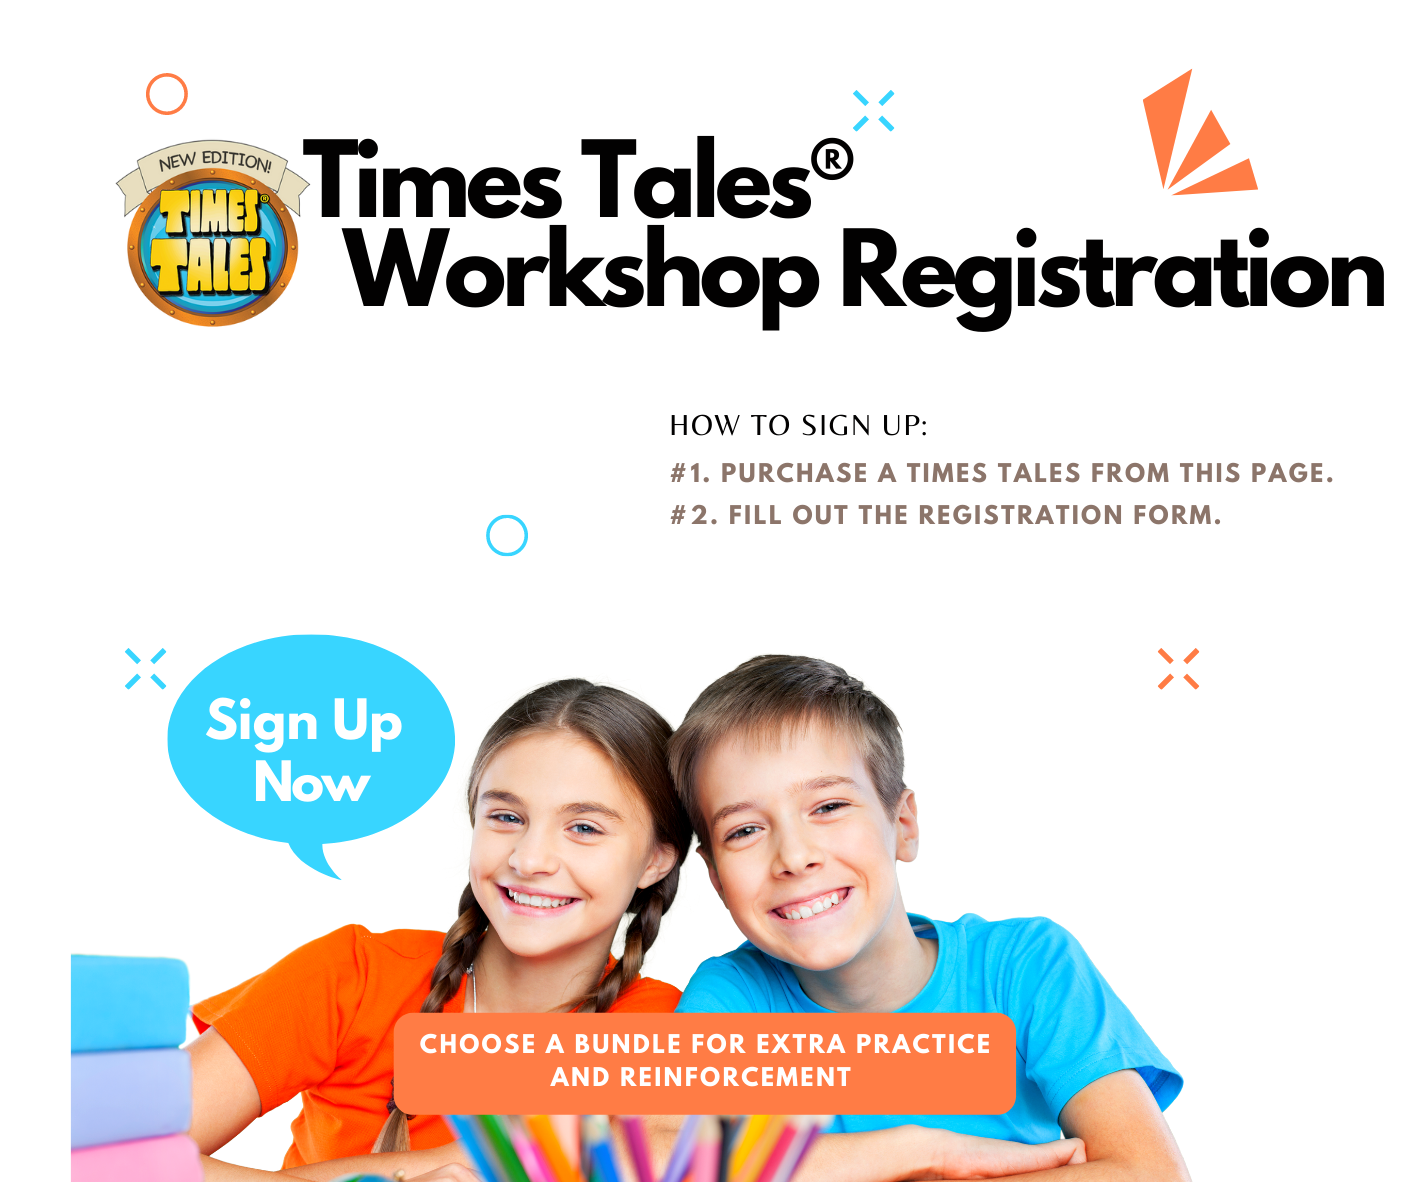 Times Tales Workshop Registration . How to sign up. Purchase a Times Tales from this page. #2 Fill out the registration form. Sign up now.